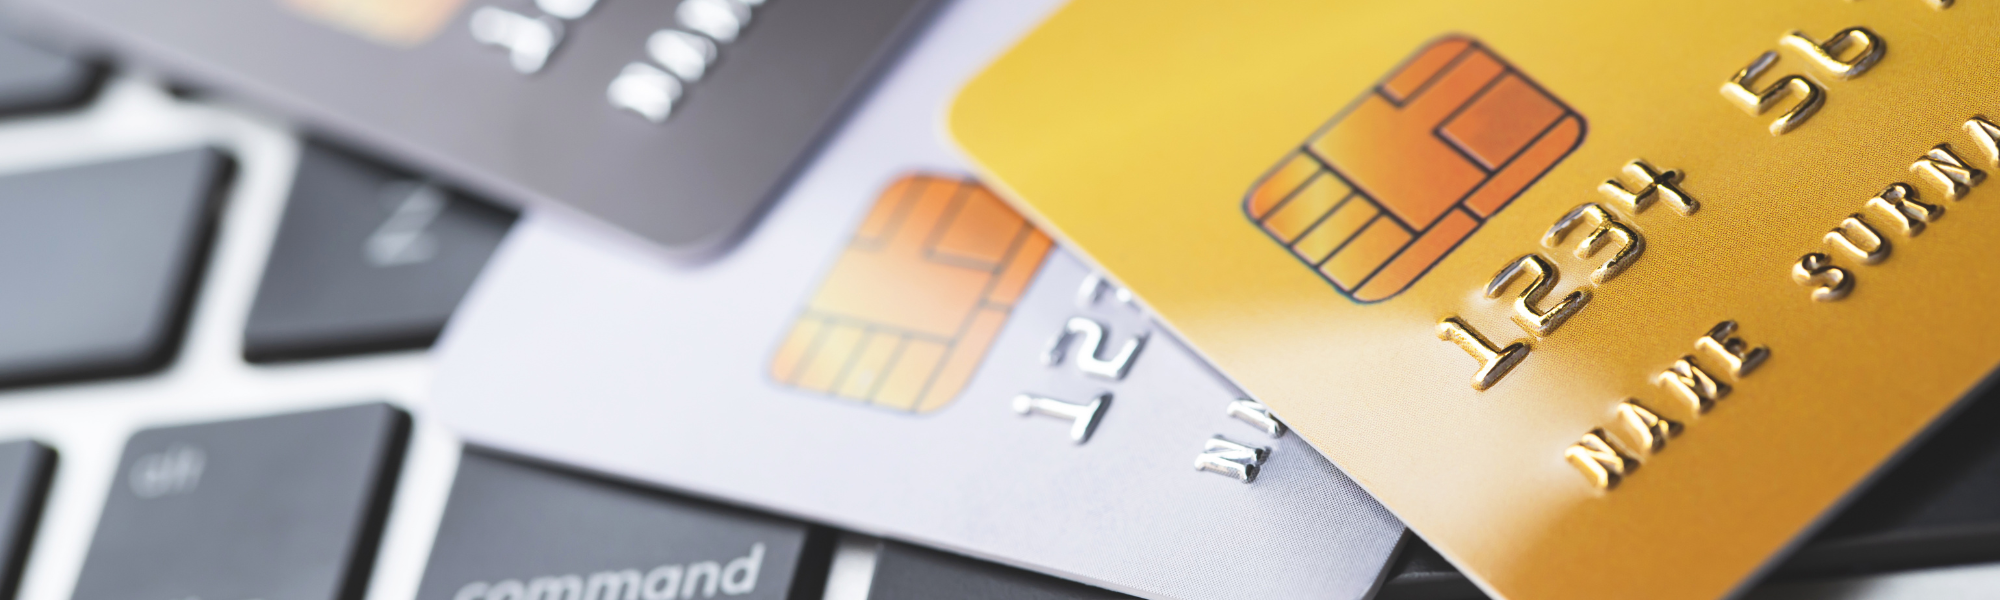 Payment Card Fraud – The Calm Before the Storm?